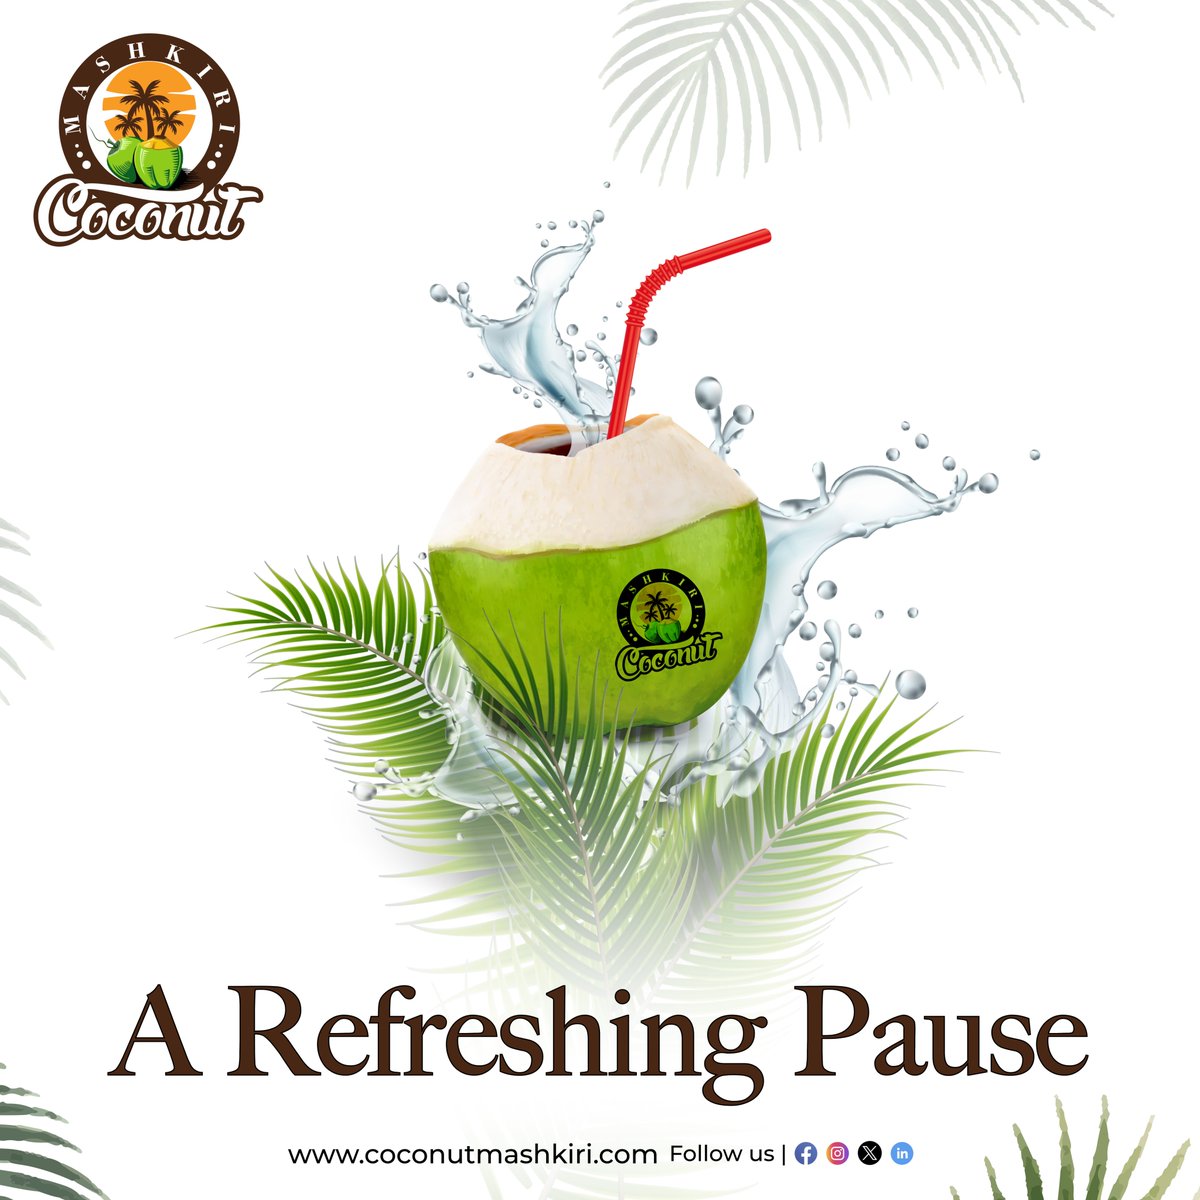 Take a refreshing pause with Coconut Mashkiri.

Our tender coconuts offer a blissful escape from the everyday hustle.

For more info
📞 Call: +91 84948 07691
🌐 Visit: coconutmashkiri.com
.
.
.
#tendercoconut #tendercoconutwater #tendercoconuts #coconutwater #coco #hydration